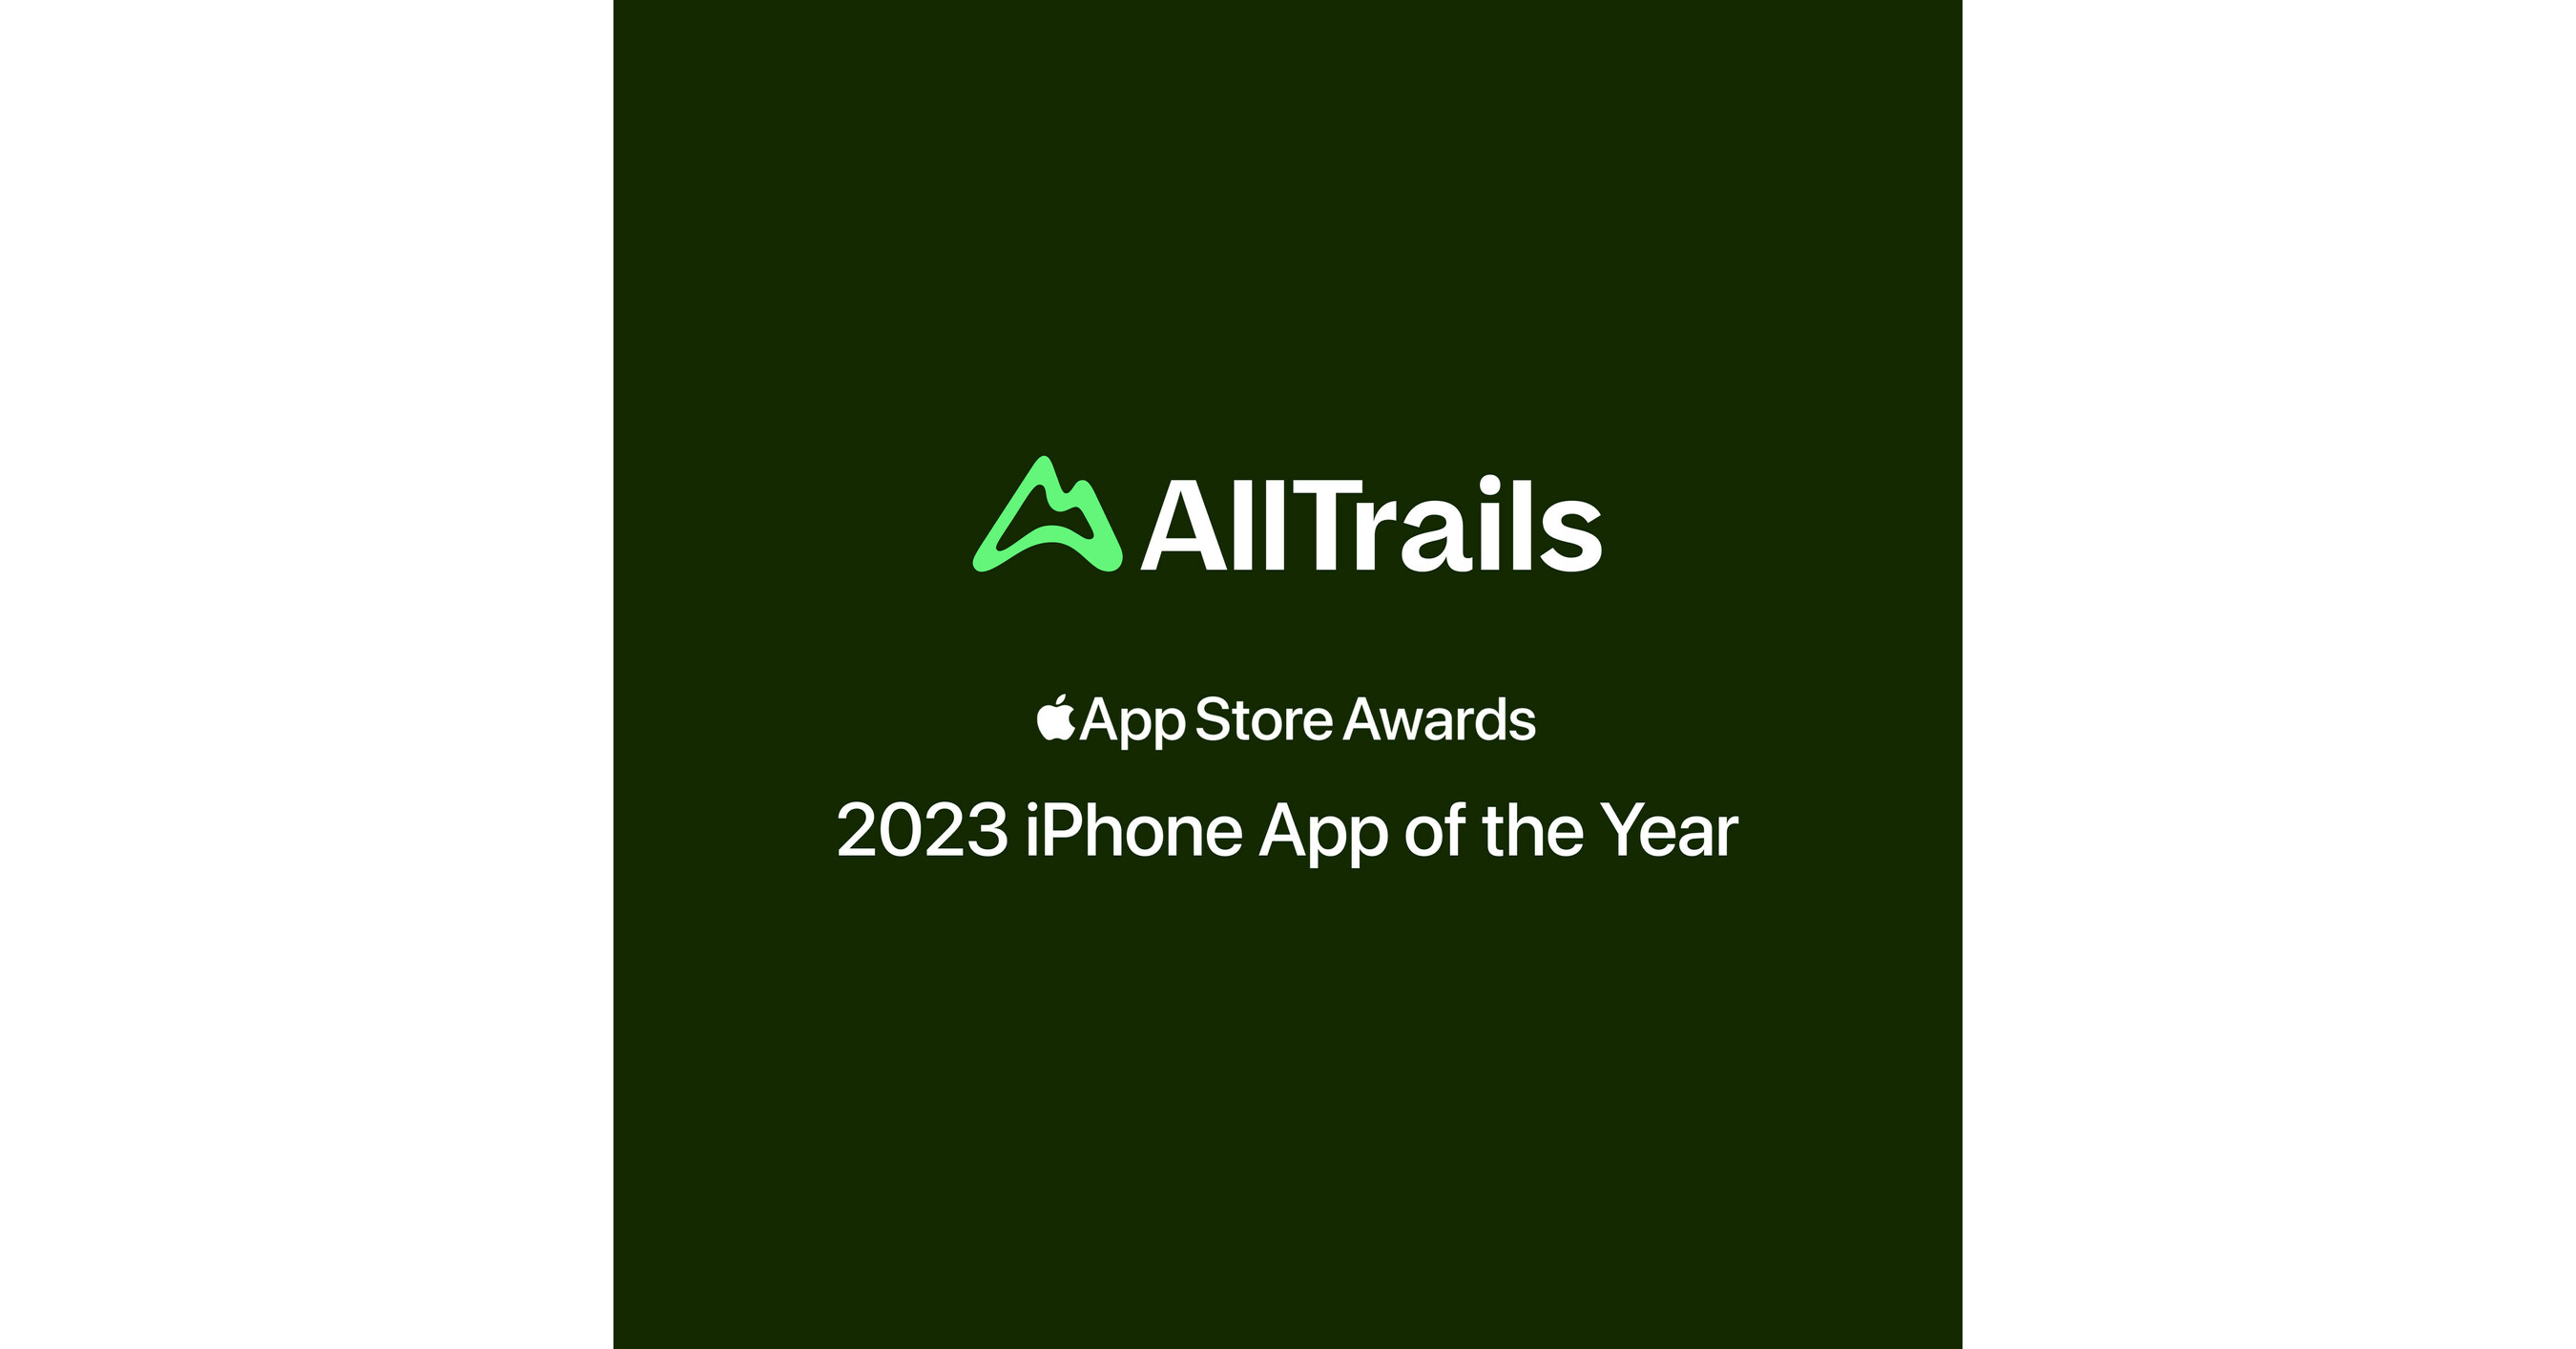 AllTrails Named Apple’s 2023 iPhone App of the Year